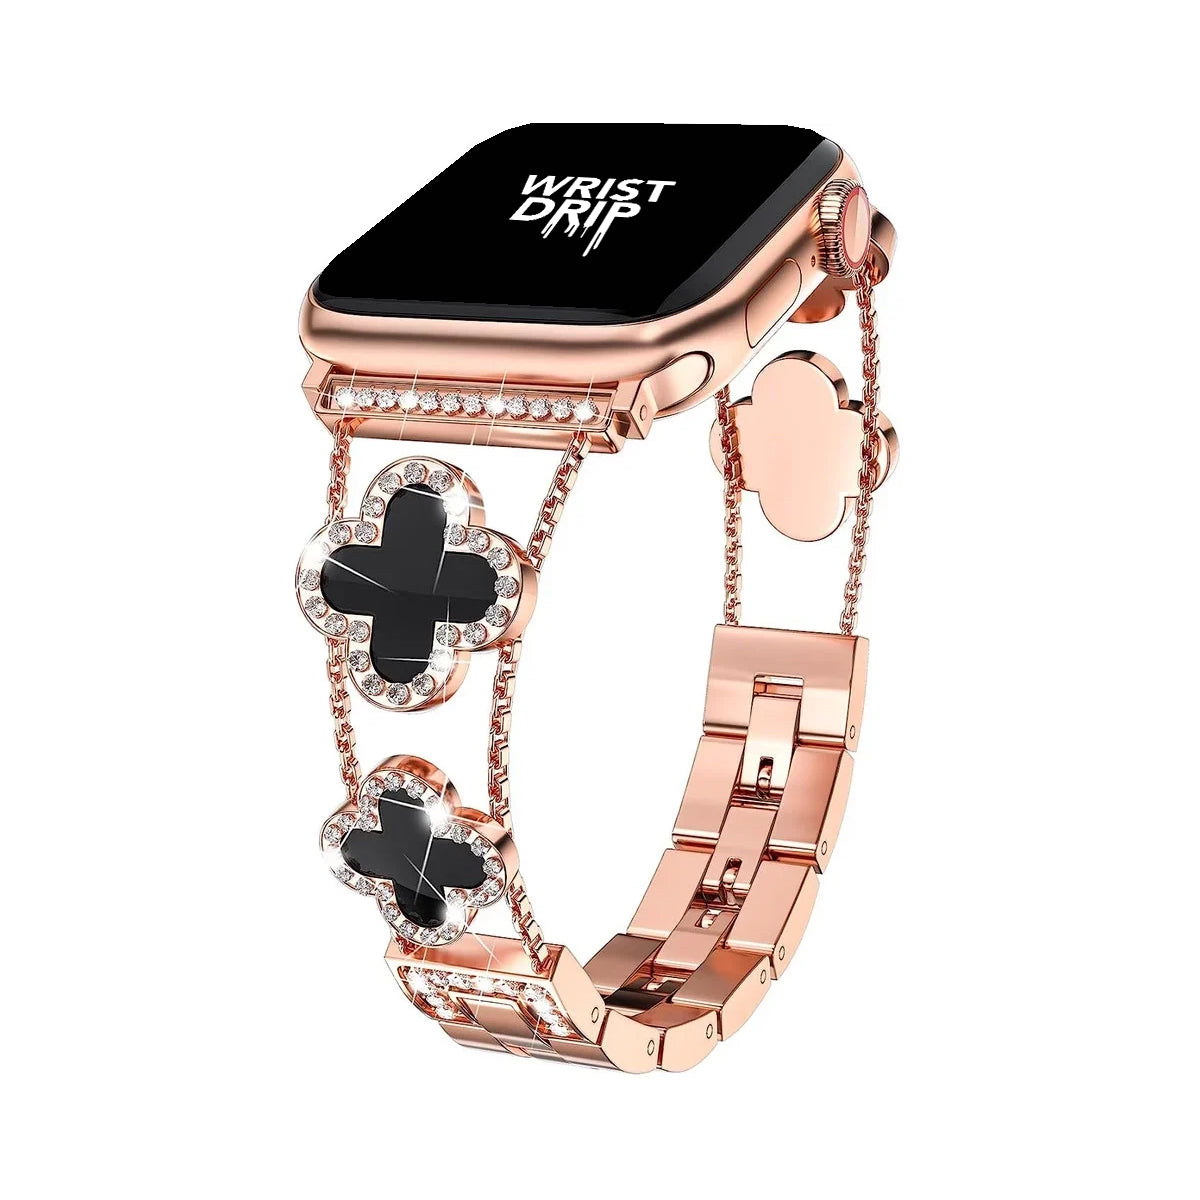 The Desire Stainless Steel Apple Watch Band (5 Colours)